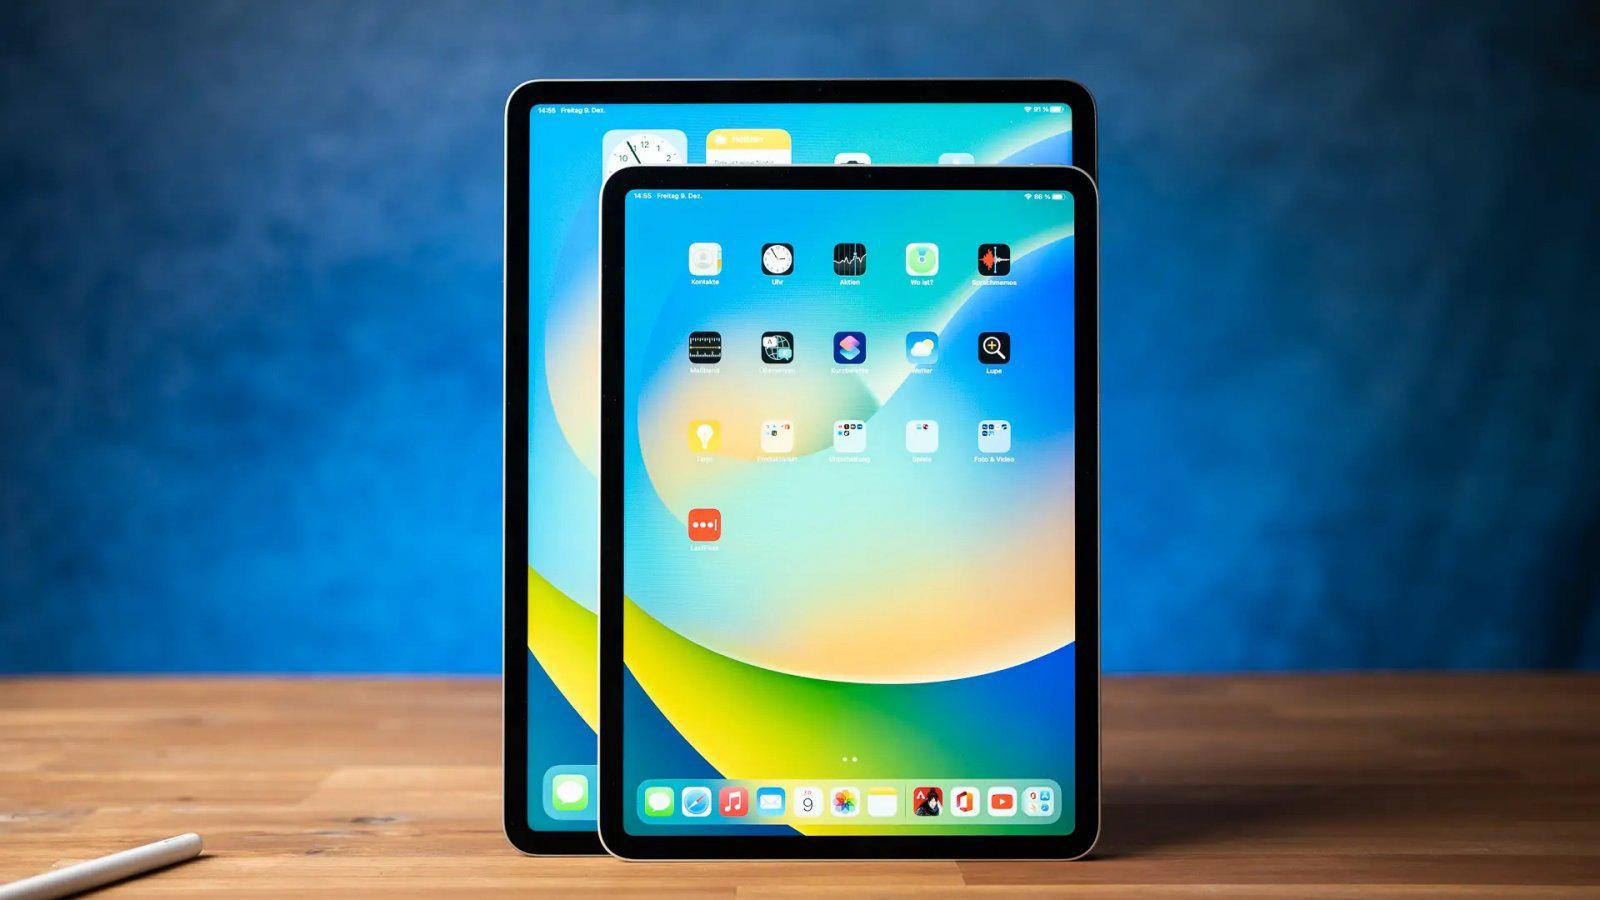 New iPad Pro Models with OLED Displays and Improved Performance: Inside Apple’s Upcoming Release